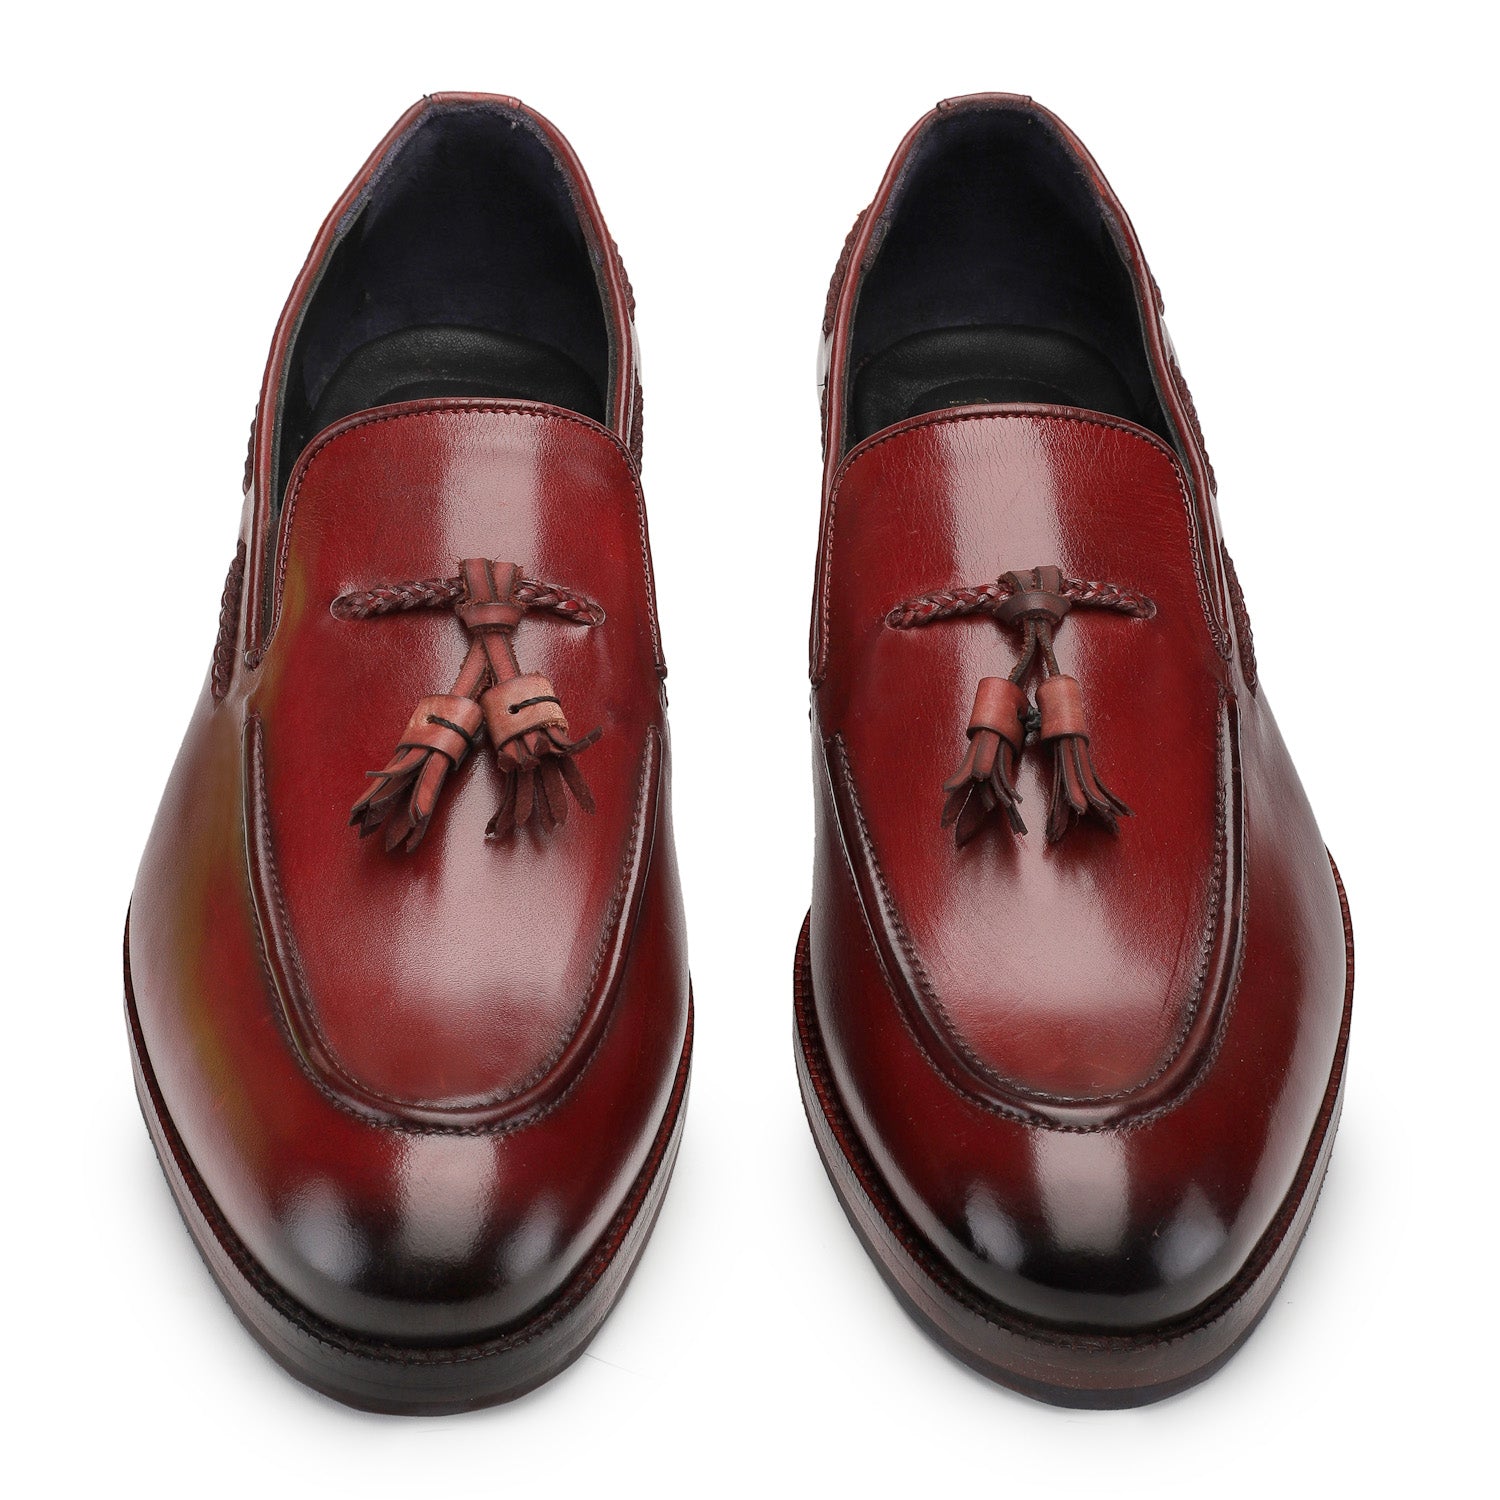 Manolo Tassel Loafer Dirty Red Suede